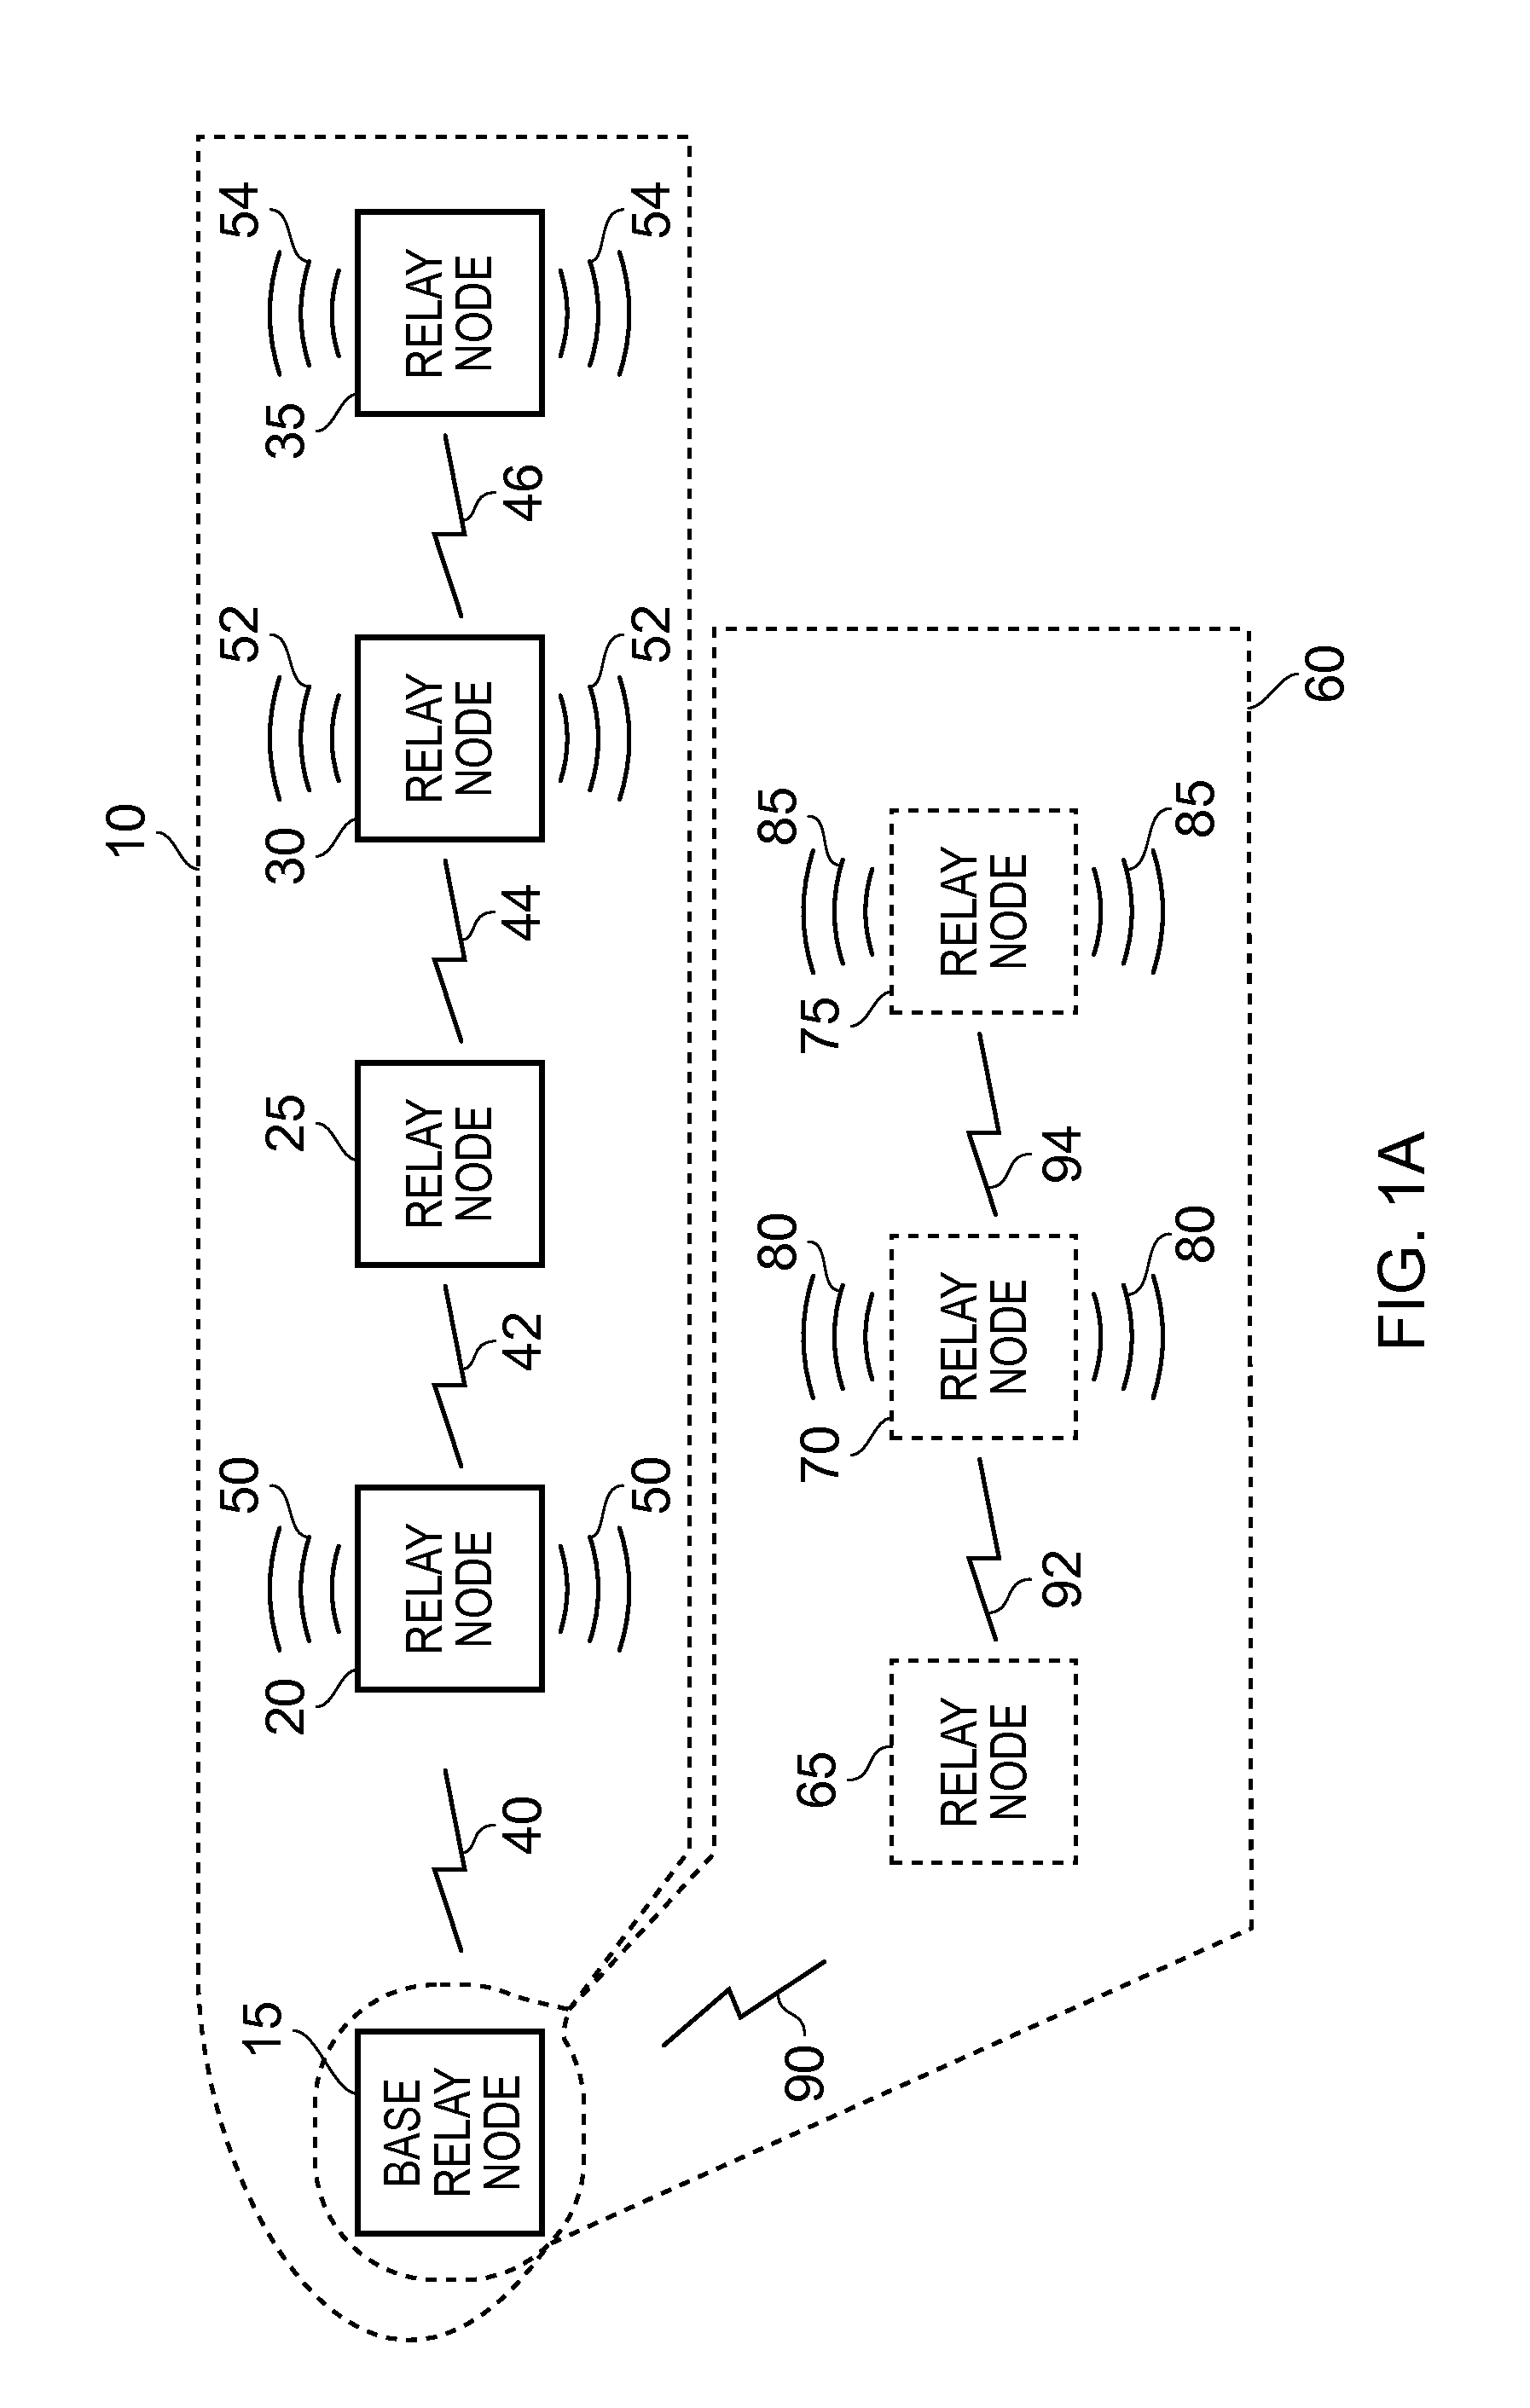 System and Method for Determining a Communications Schedule for Relay Nodes of a Wireless Relay Network